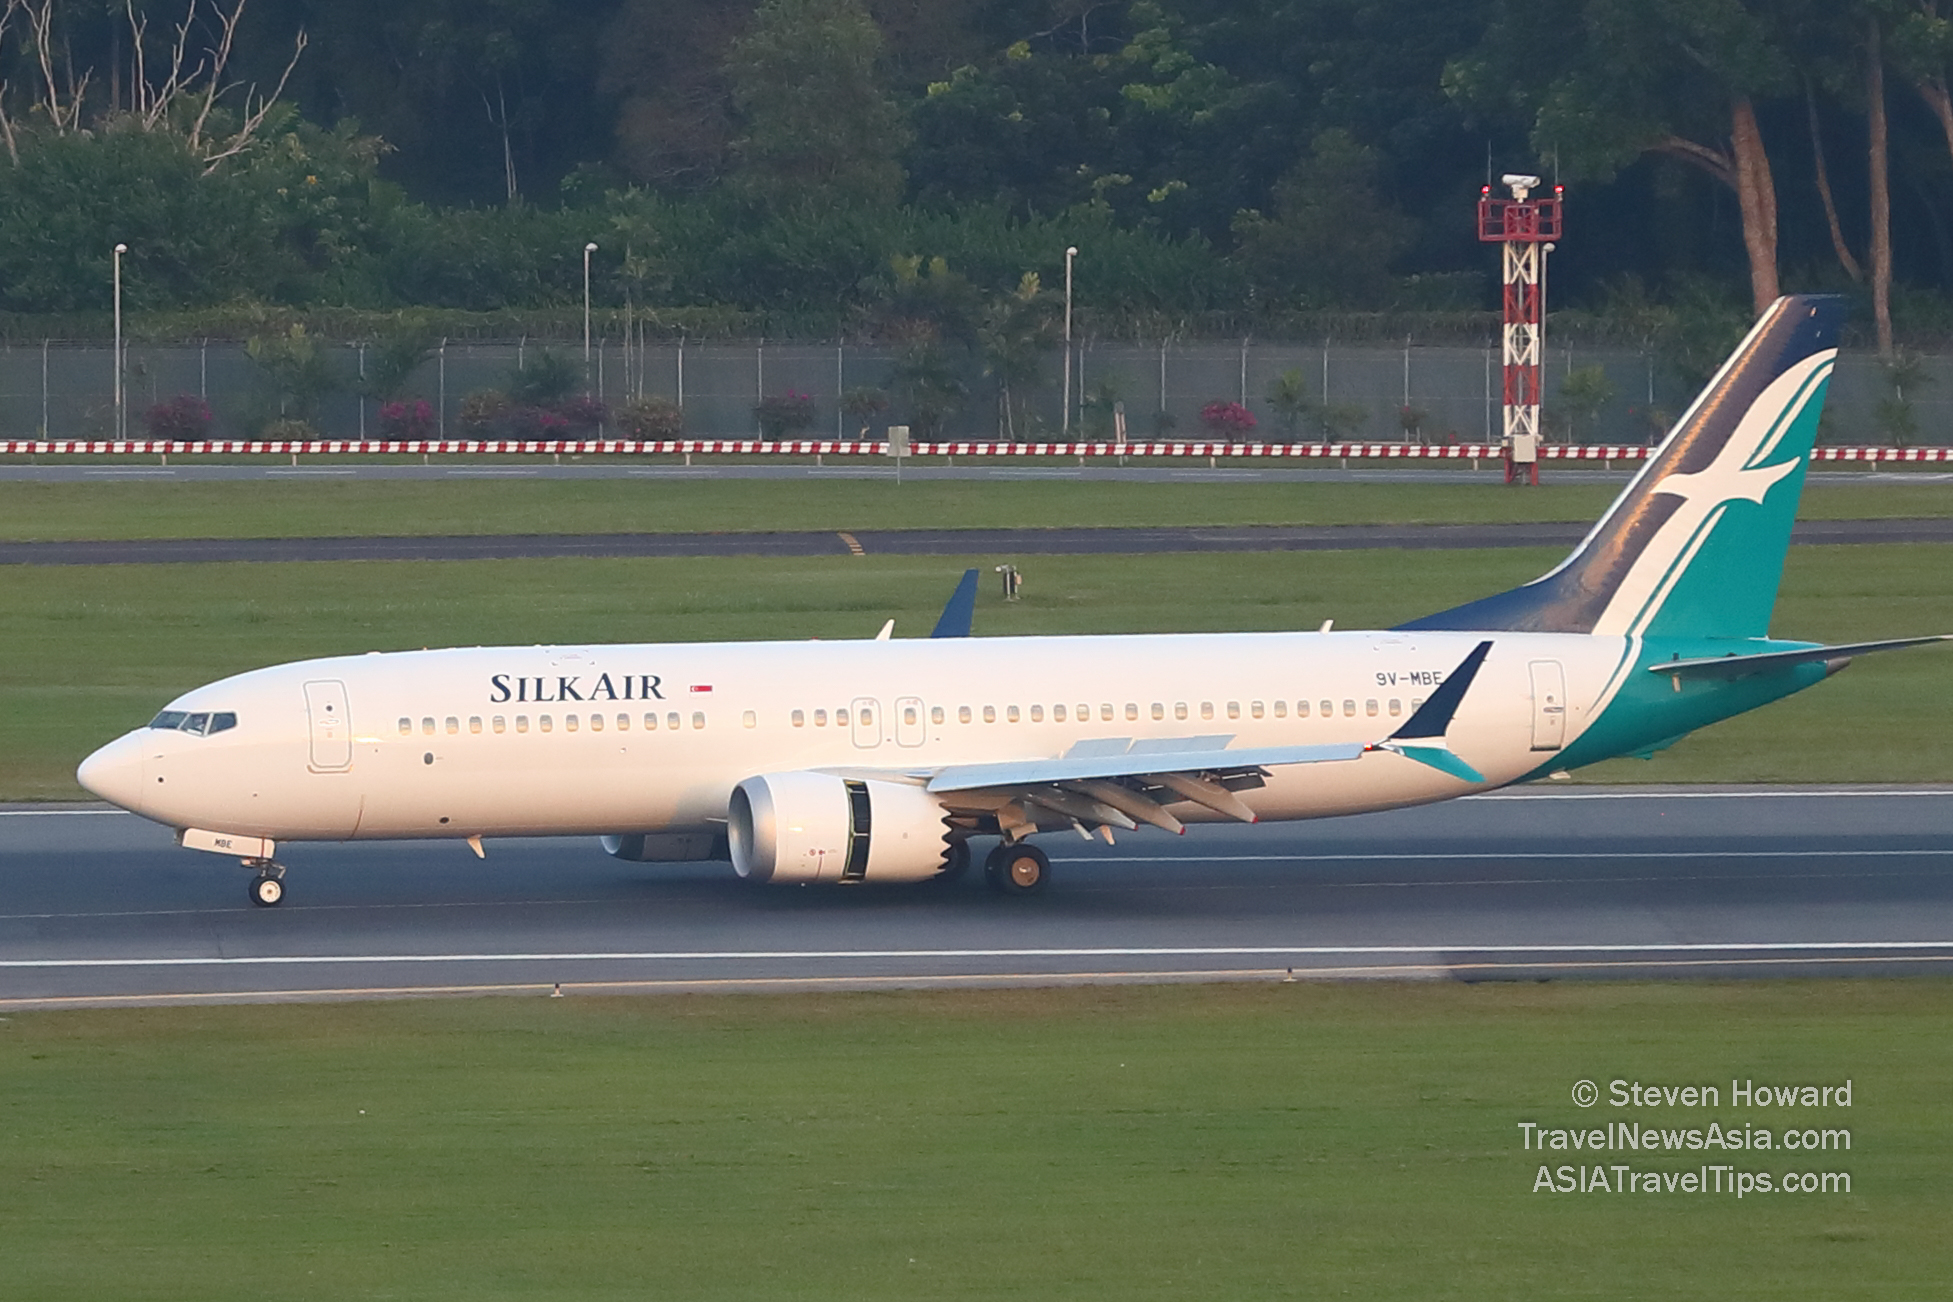 SilkAir Boeing 737 MAX 8 reg: 9V-MBE. Picture by Steven Howard of TravelNewsAsia.com Click to enlarge.